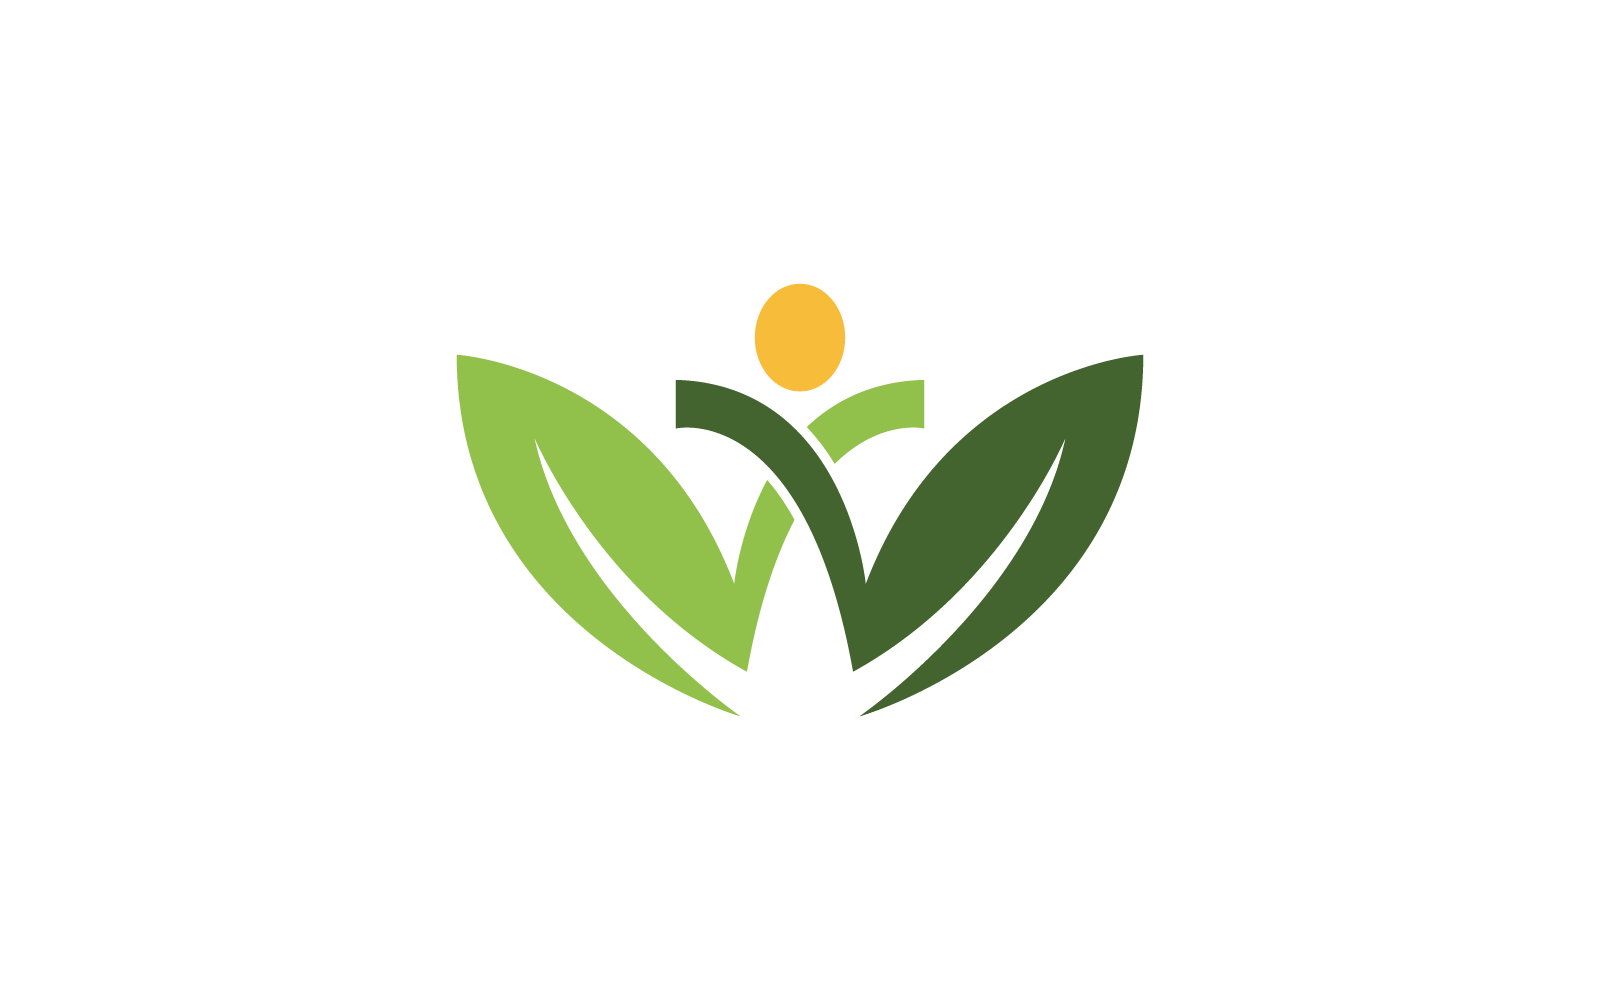 Healthy Life people logo template design